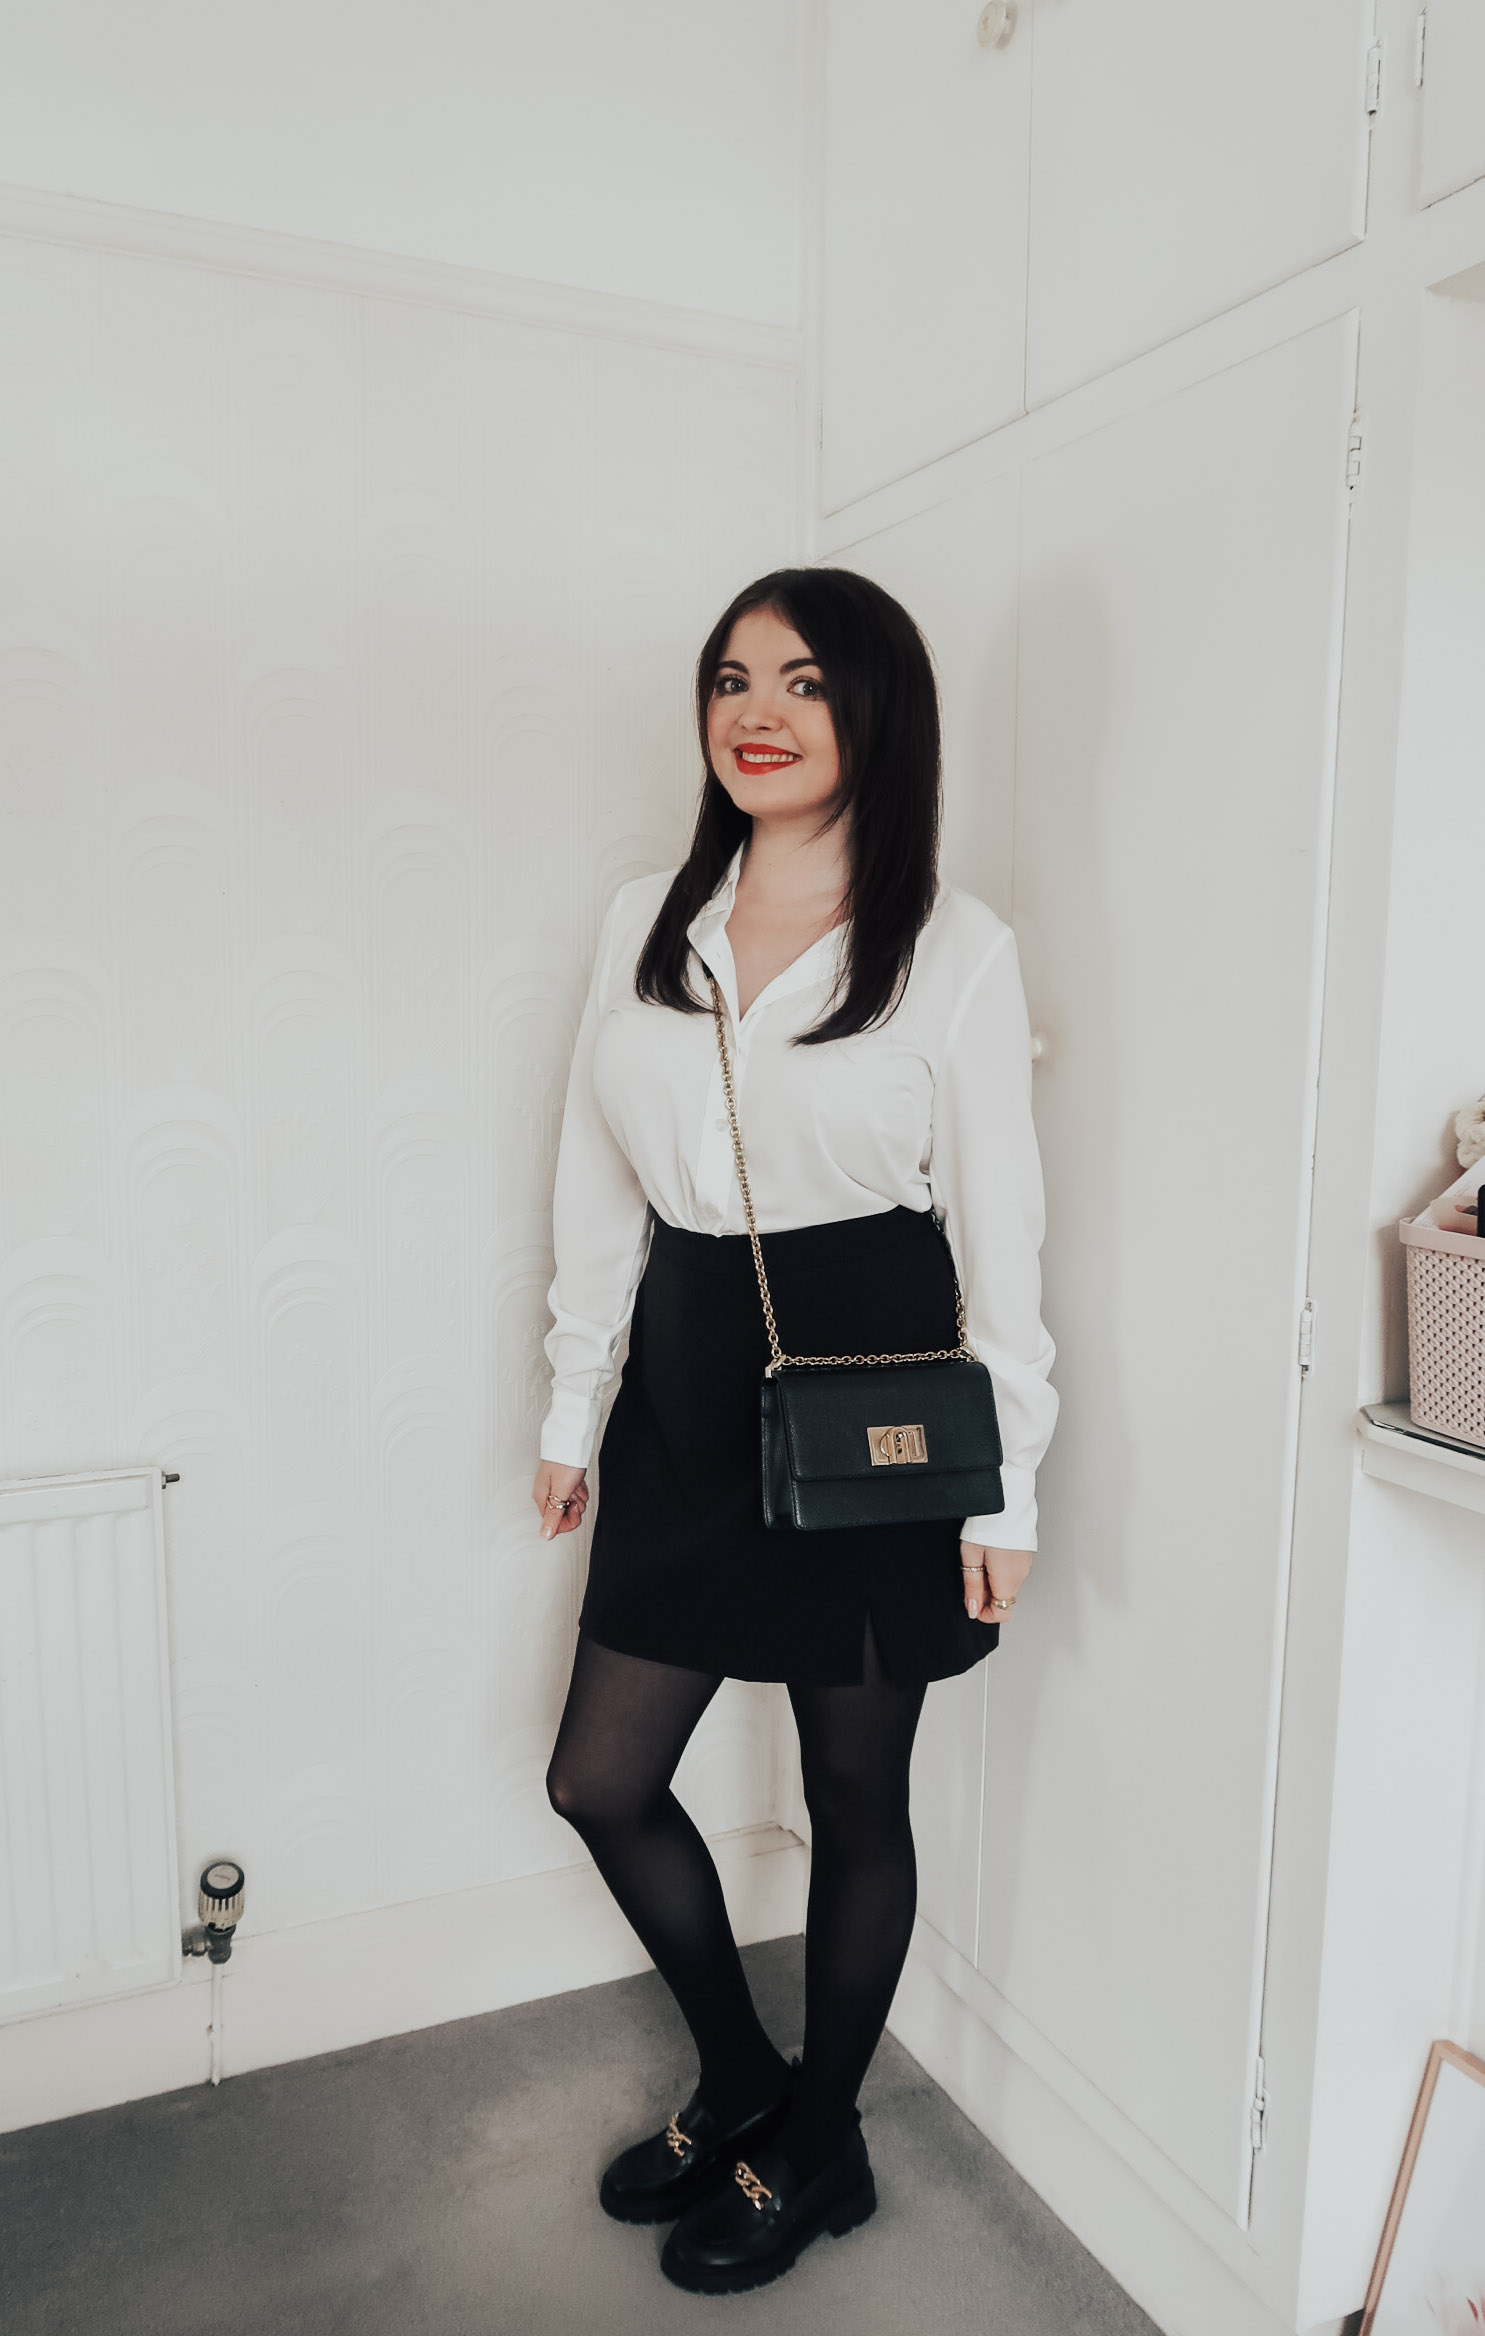 A woman wearing an ivory blouse and black mini skirt.